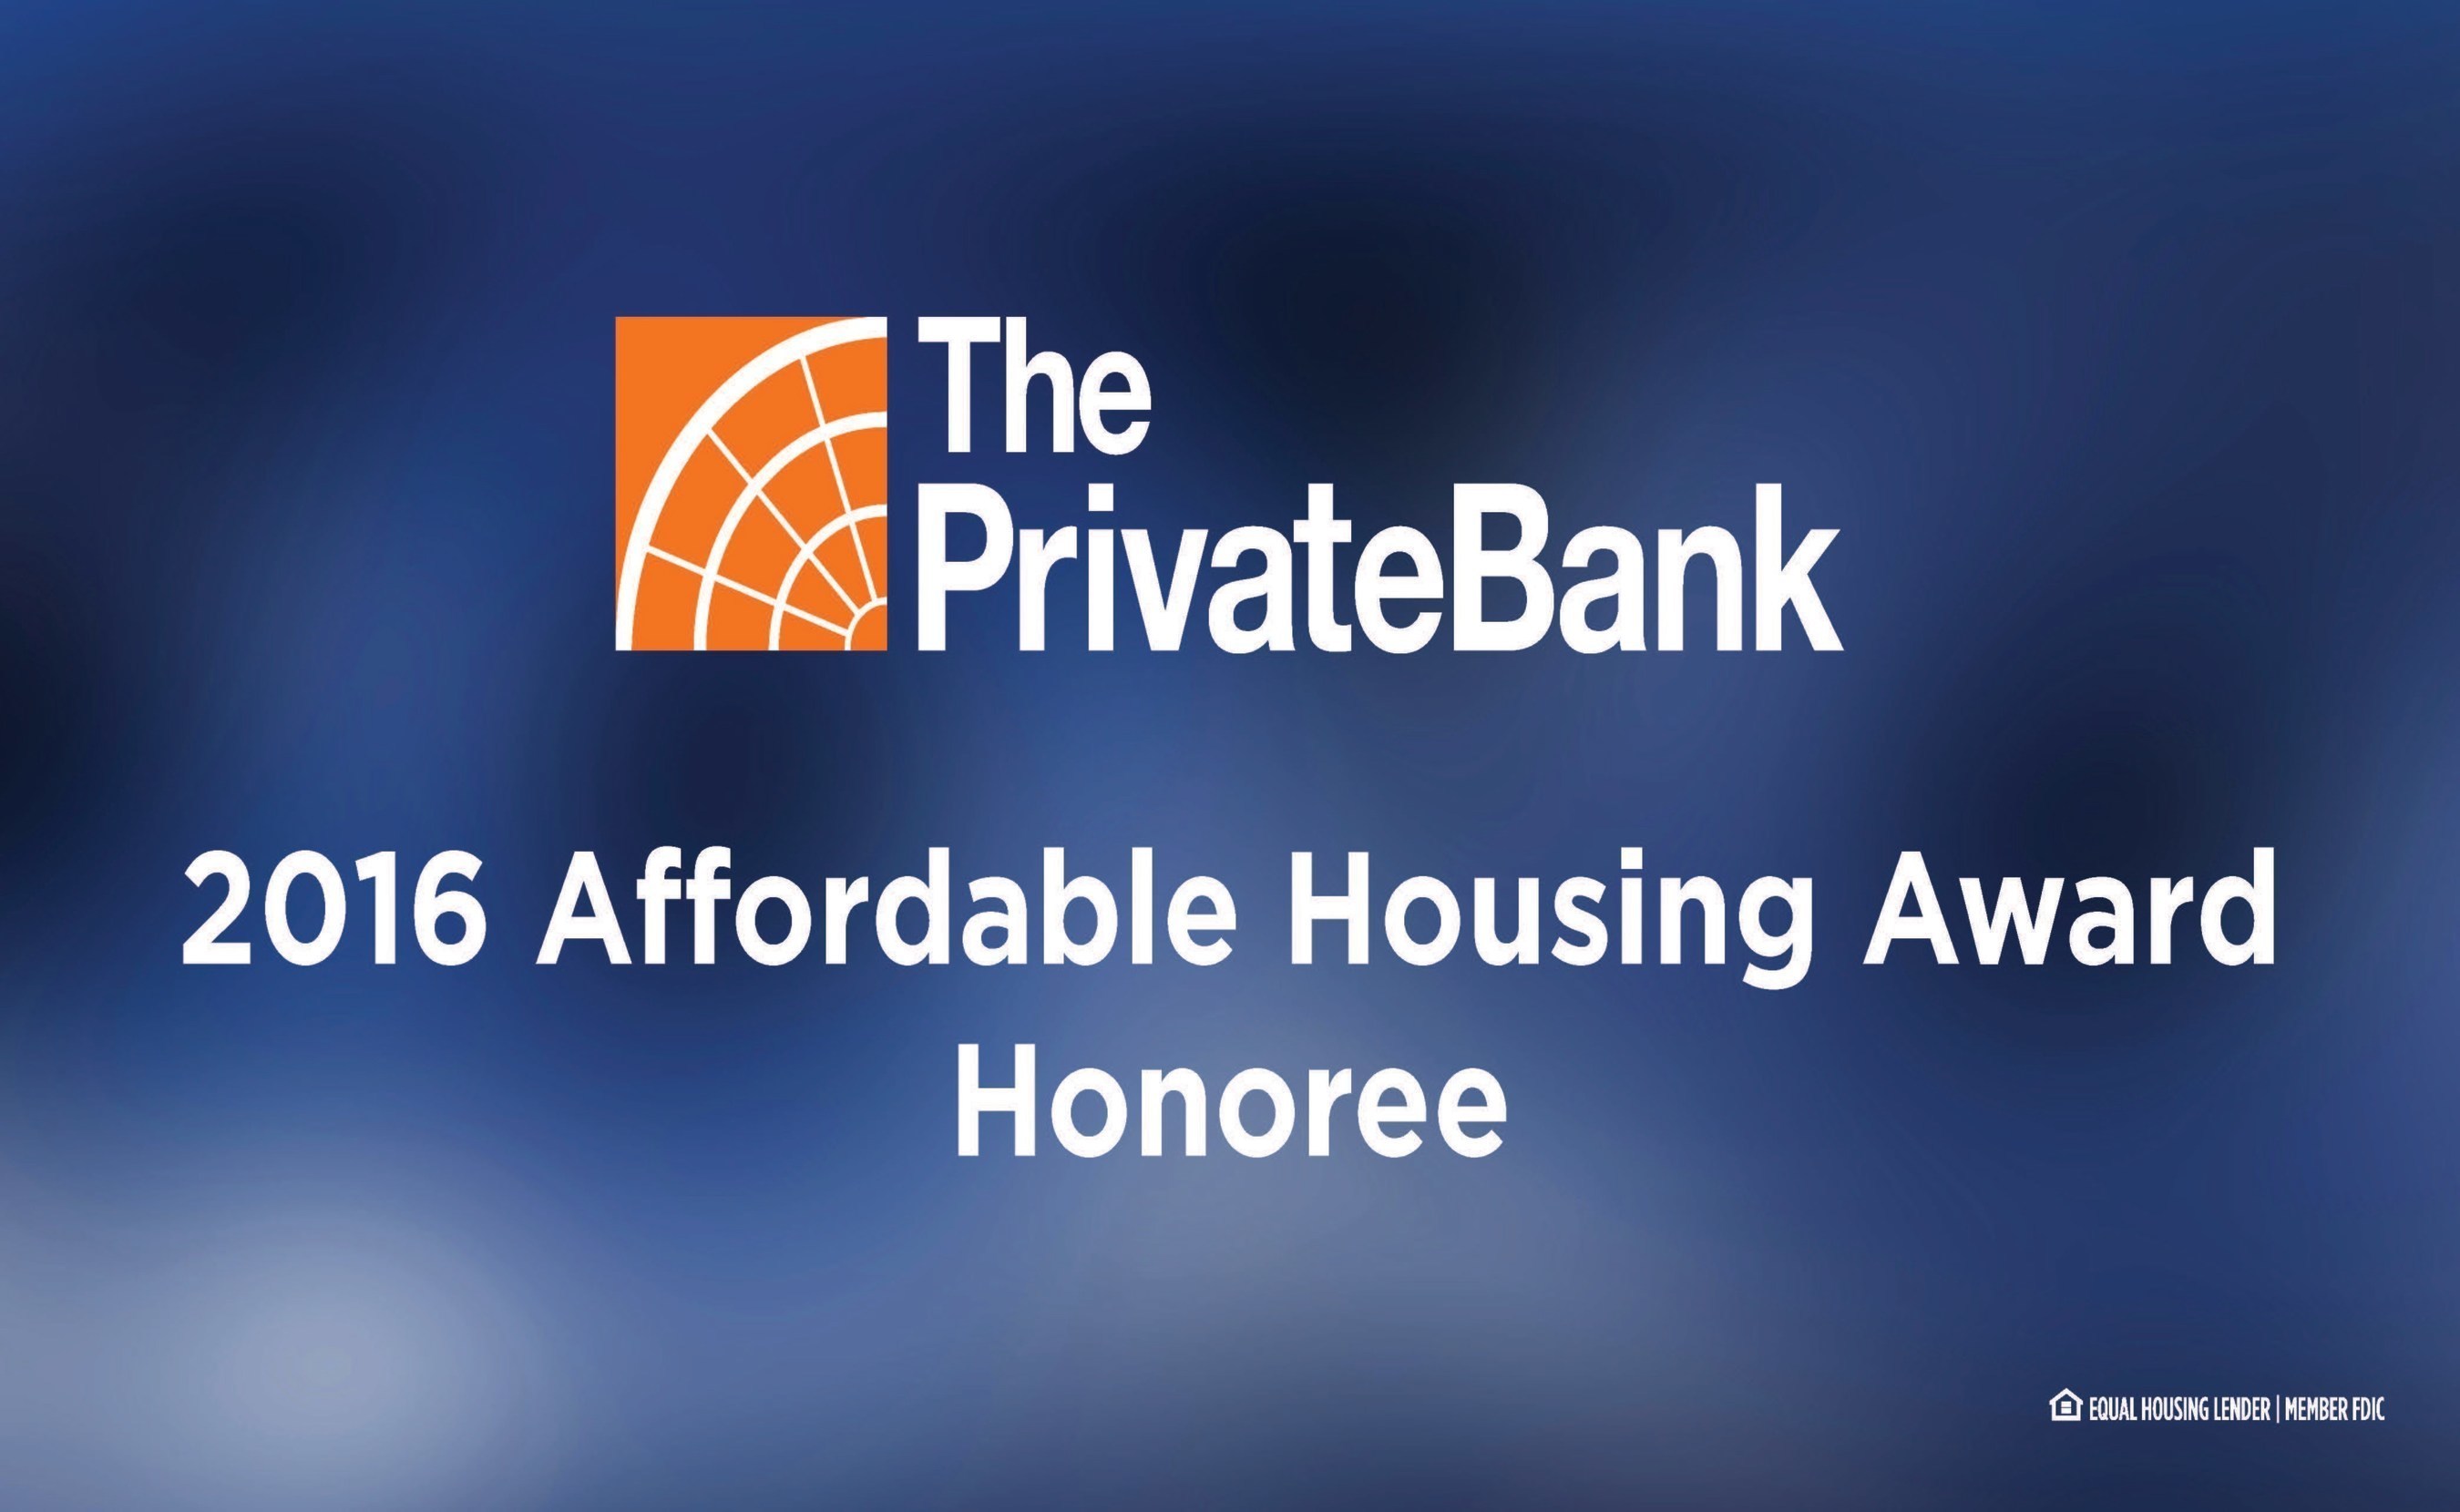 The PrivateBank honors 18 Midwestern organization with 2016 Affordable Housing Award grants.